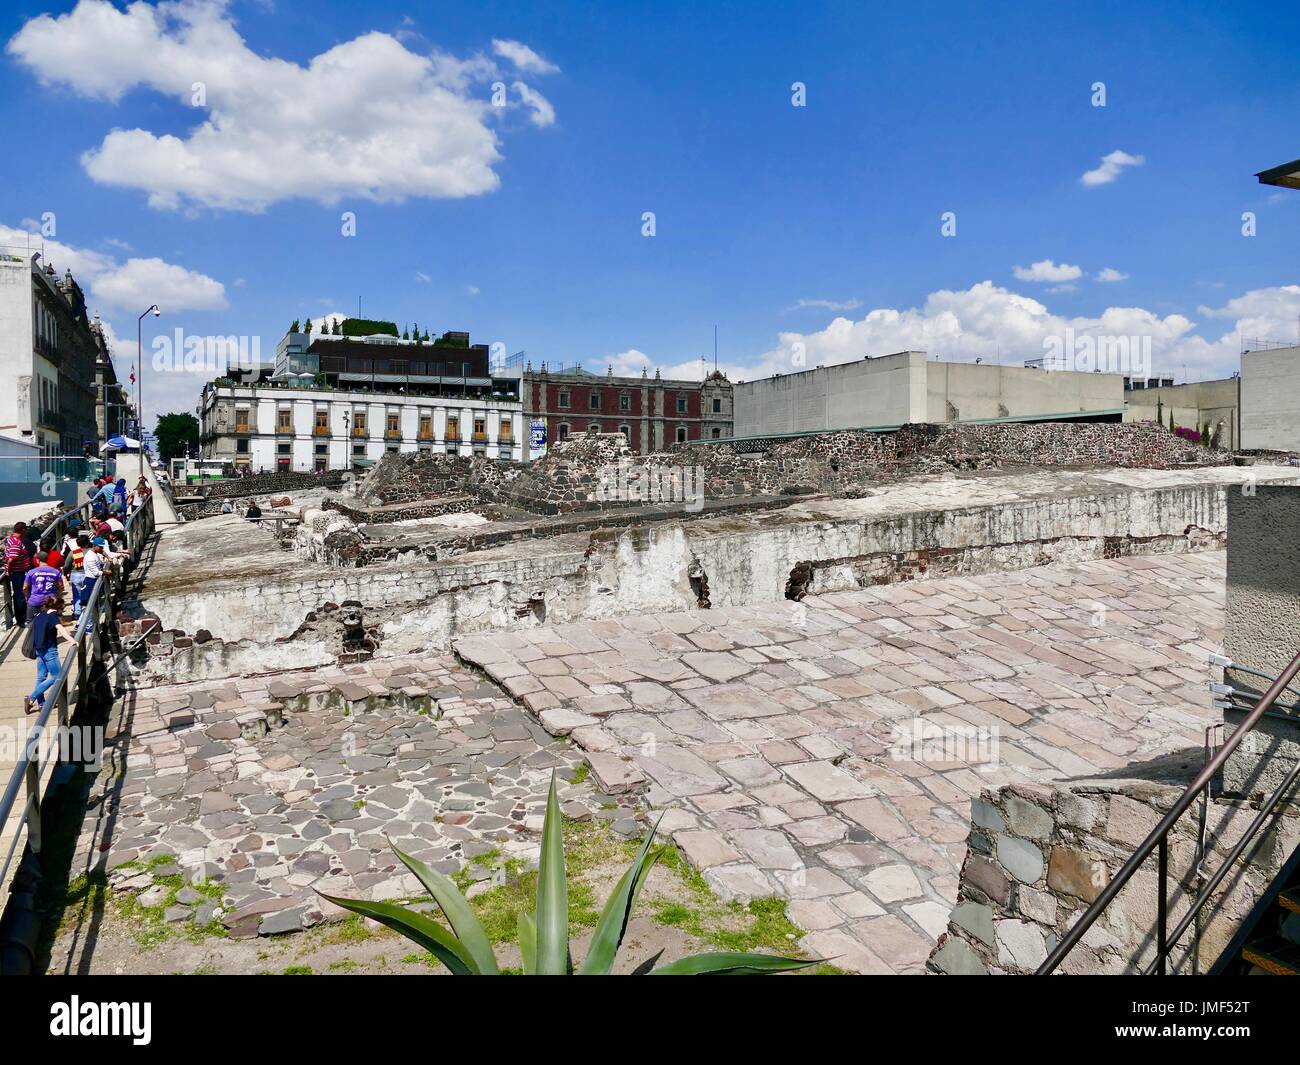 Visitors cross walkway over archeological excavation site of Aztec temple, near Zocolo Square, Central Mexico City, Mexico. Stock Photo